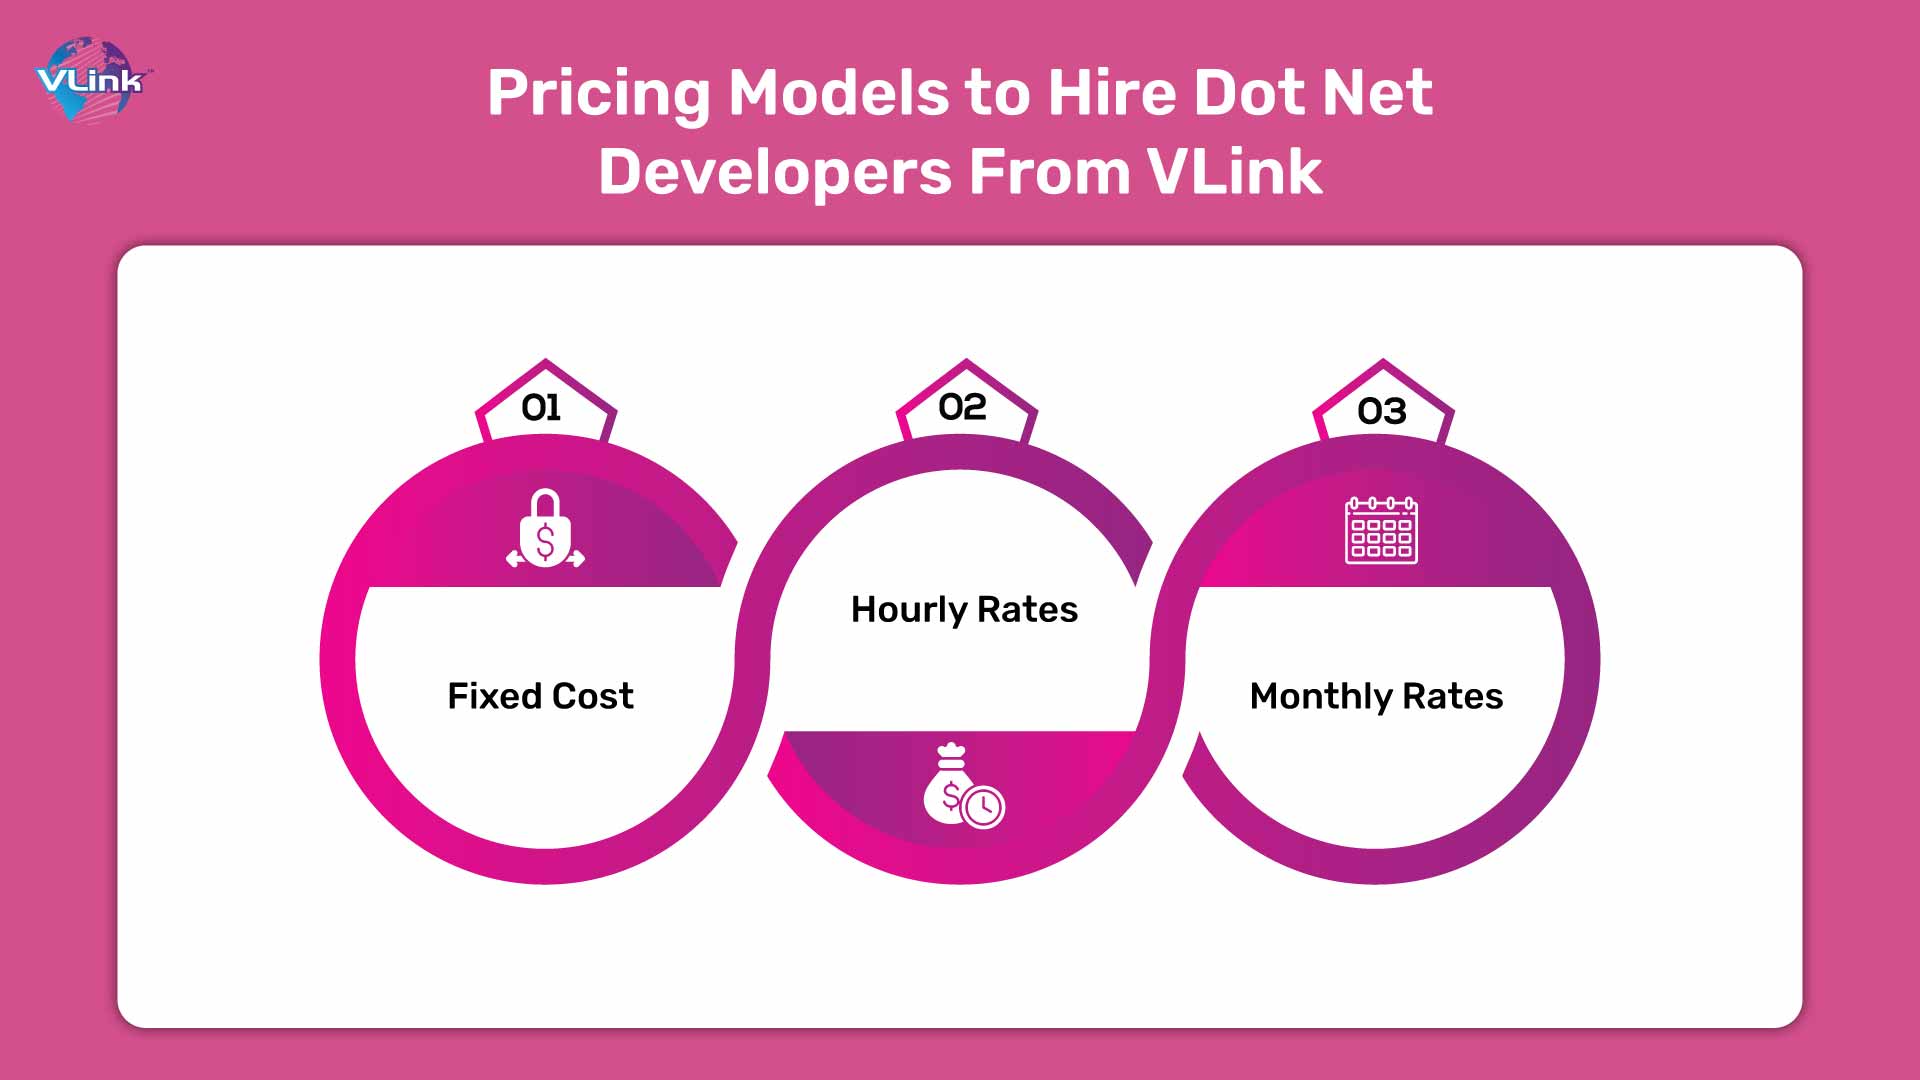 Pricing Models to Hire Dot-Net Developers From VLink